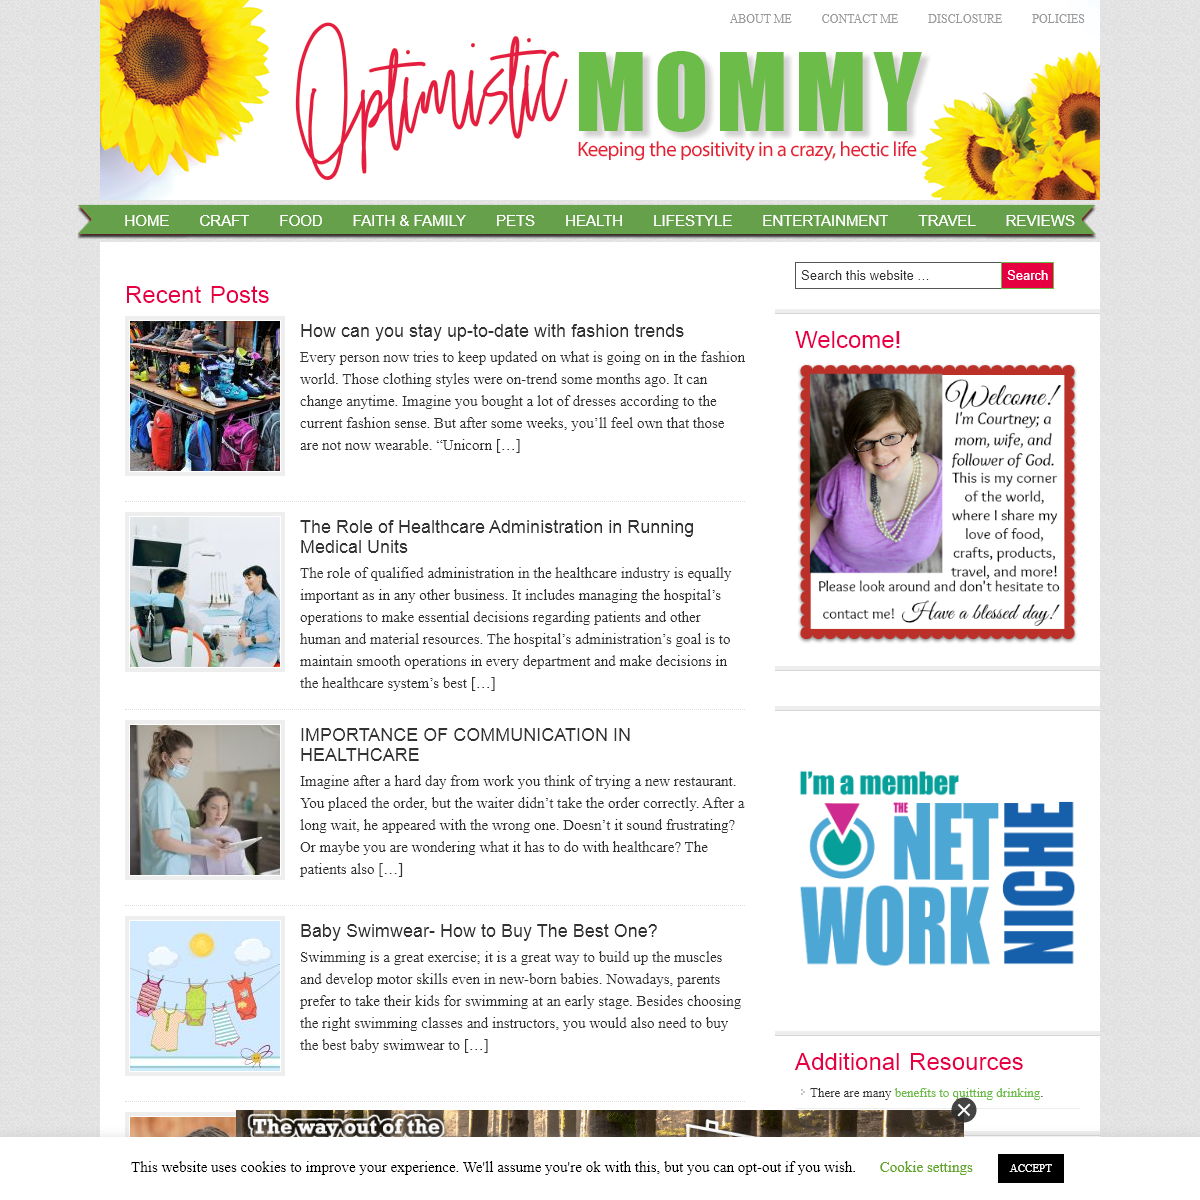 A complete backup of optimisticmommy.com